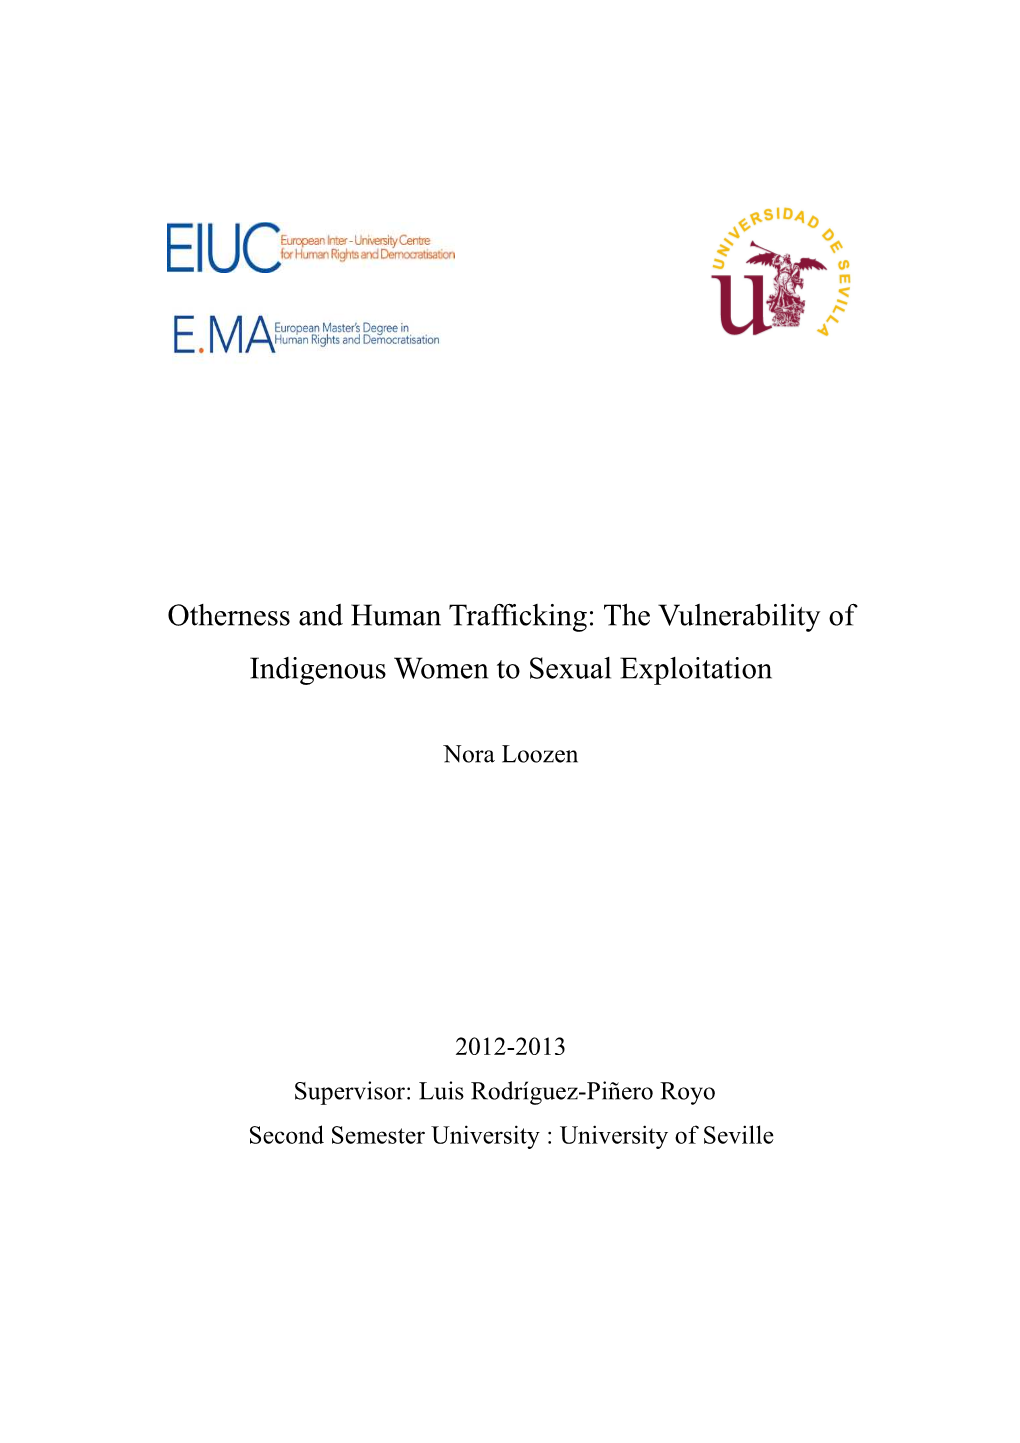 Otherness and Human Trafficking: the Vulnerability of Indigenous Women to Sexual Exploitation